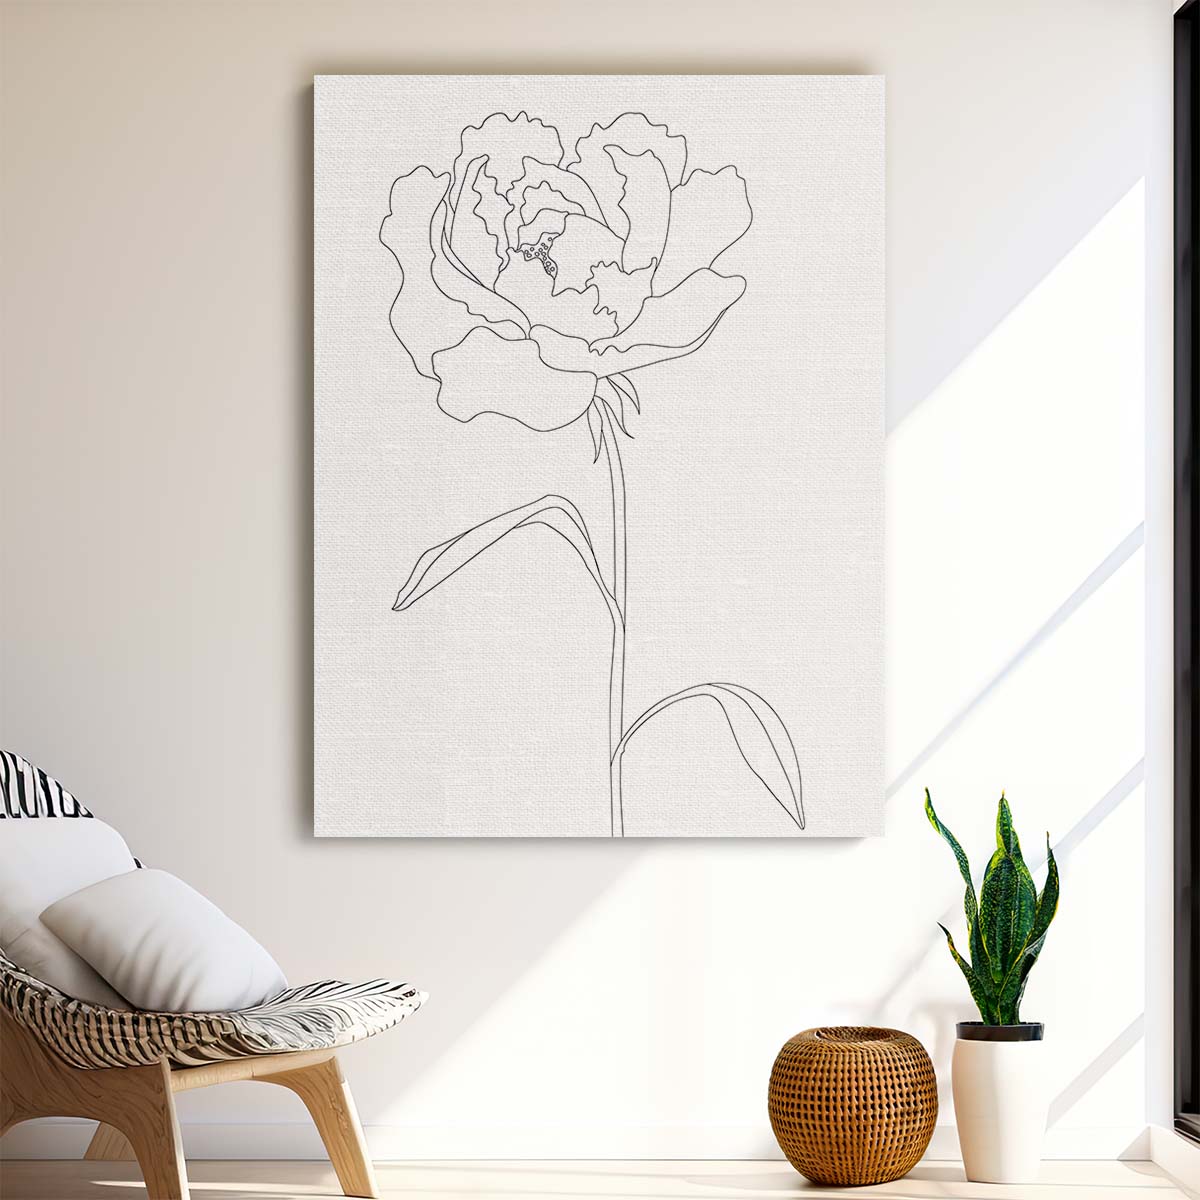 Minimalist Peony Illustration Line Art - Black and White Botanical Sketch by Luxuriance Designs, made in USA